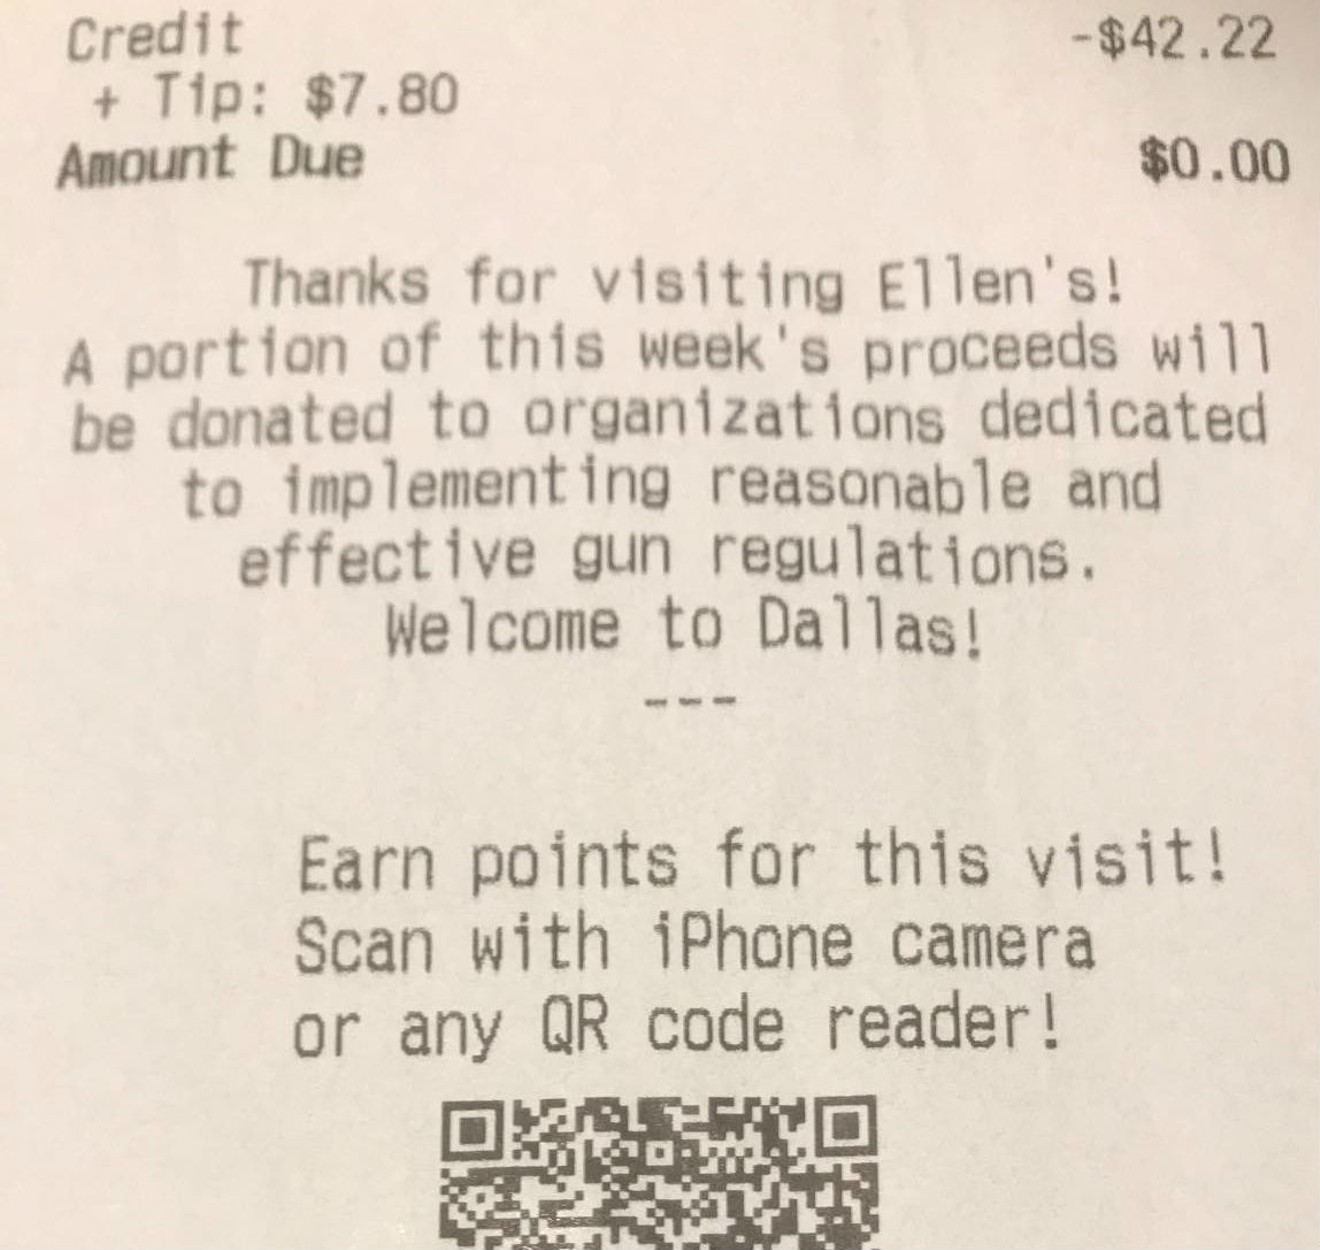 The owner of Ellen's restaurant in the West End has a message for NRA conference attendees eating at his restaurant this weekend.